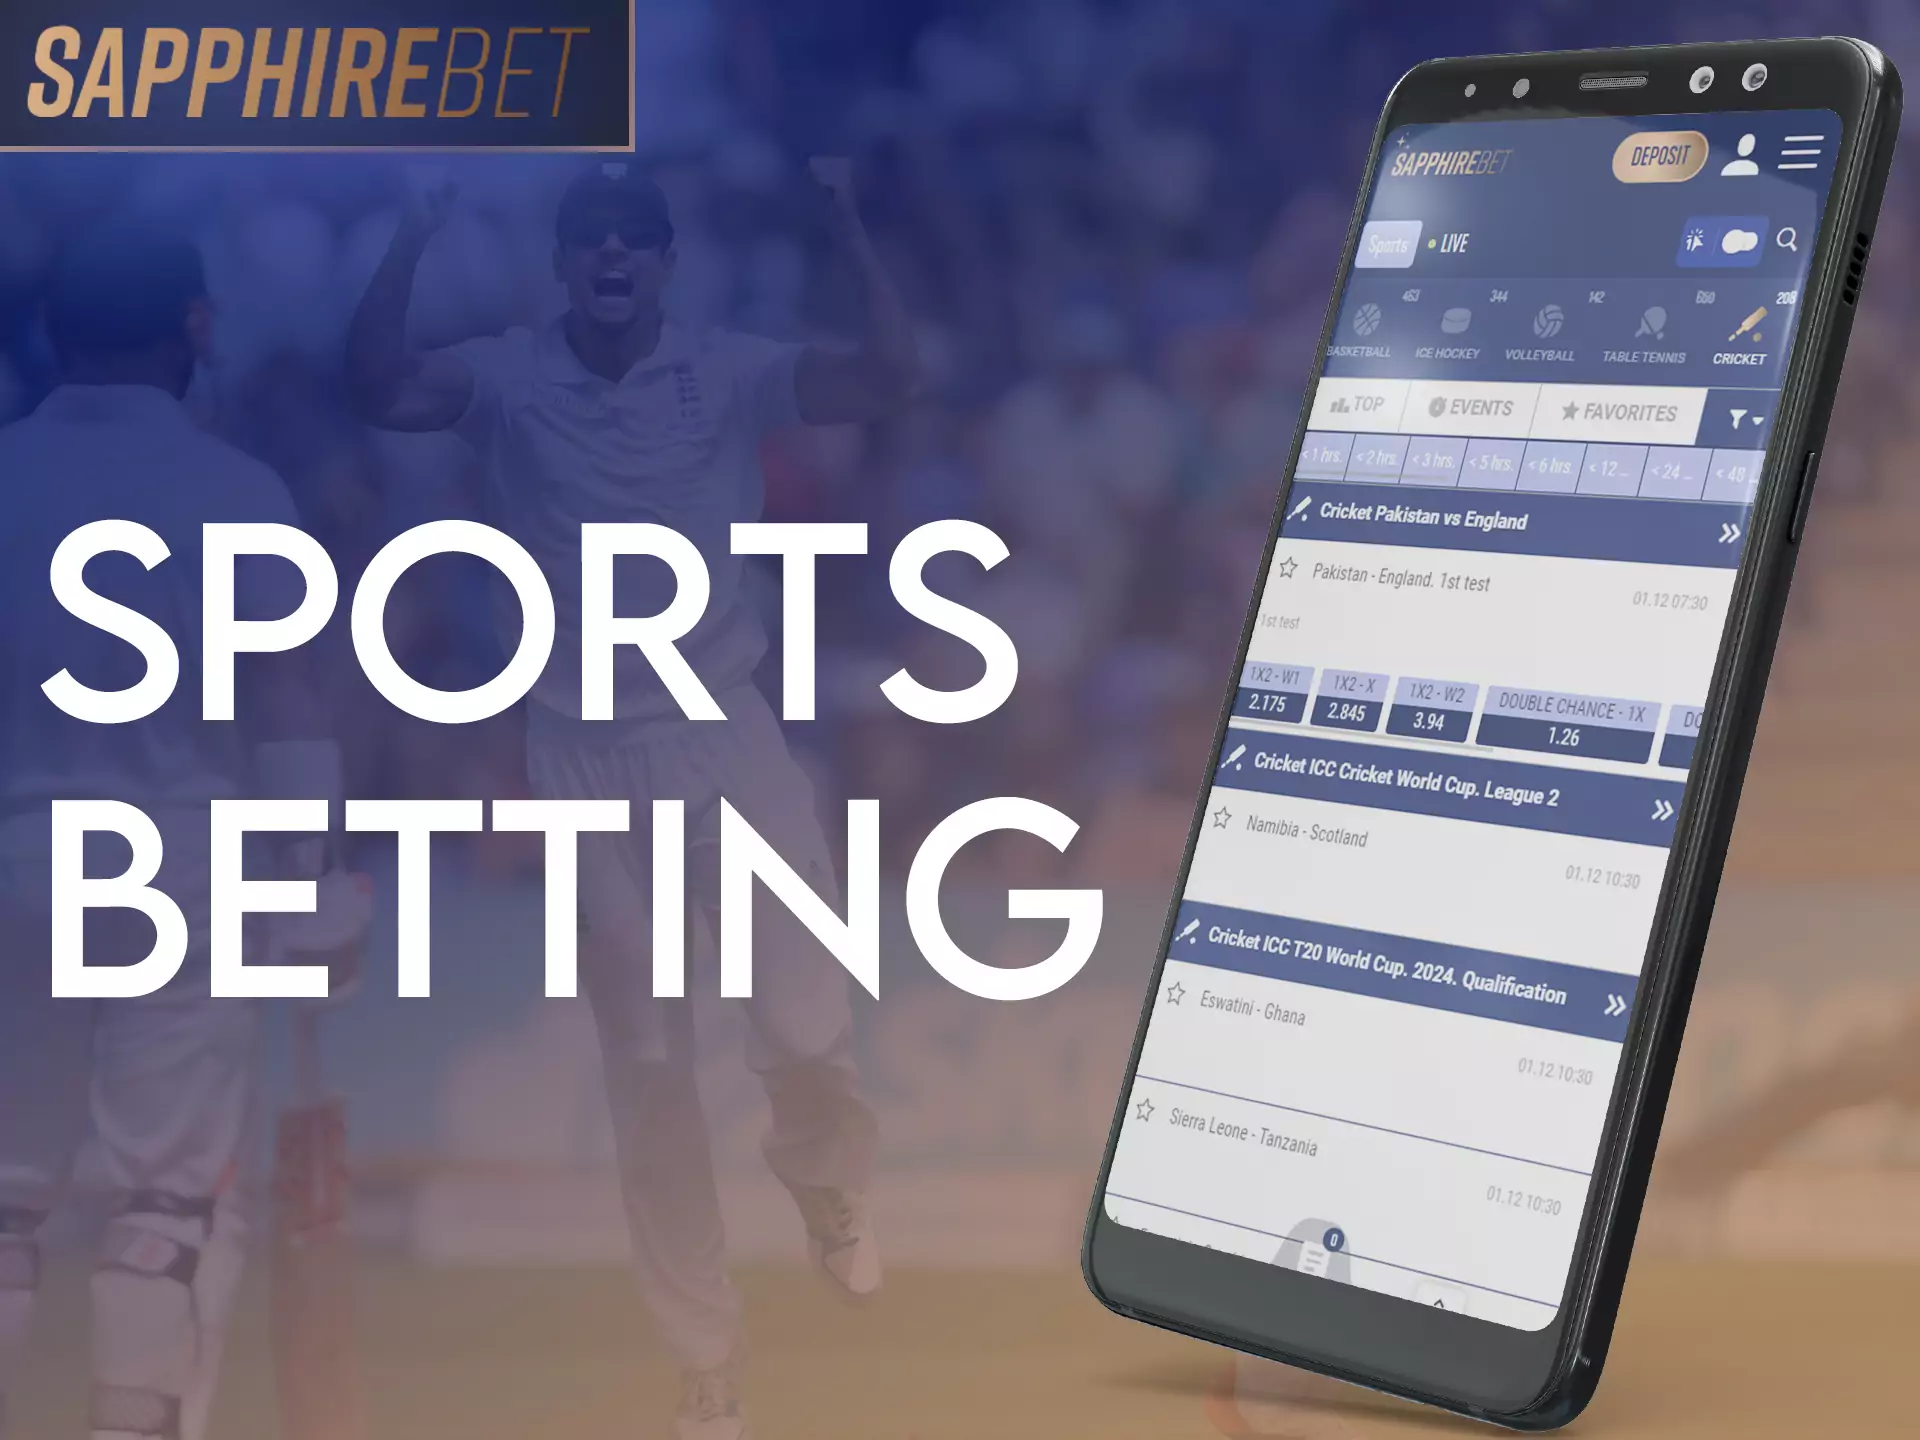 Place bets on different sports at Sapphirebet.